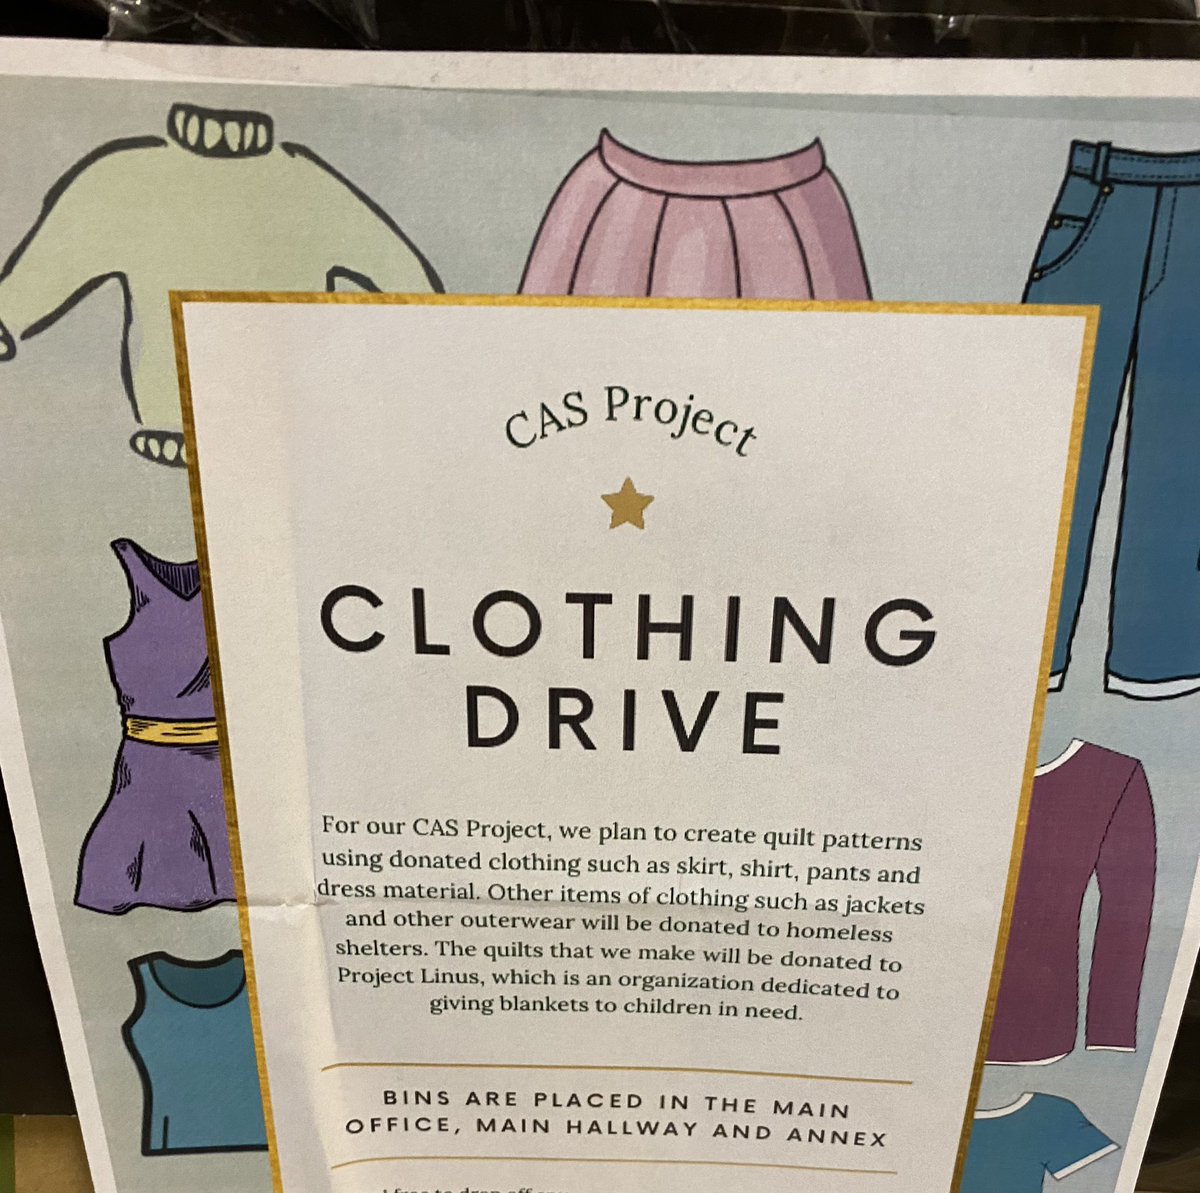 Washington-Liberty IB DP students are doing wonderful things with CAS like this one supporting Project Linus! <a target='_blank' href='http://twitter.com/GeneralsPride'>@GeneralsPride</a> <a target='_blank' href='http://twitter.com/APS_SecondaryEd'>@APS_SecondaryEd</a> <a target='_blank' href='http://twitter.com/APSVaSchoolBd'>@APSVaSchoolBd</a> <a target='_blank' href='http://twitter.com/APSVirginia'>@APSVirginia</a> <a target='_blank' href='http://twitter.com/ProjectLinus'>@ProjectLinus</a> <a target='_blank' href='http://twitter.com/teacherburgos'>@teacherburgos</a> <a target='_blank' href='https://t.co/hqS6S2p0j5'>https://t.co/hqS6S2p0j5</a>